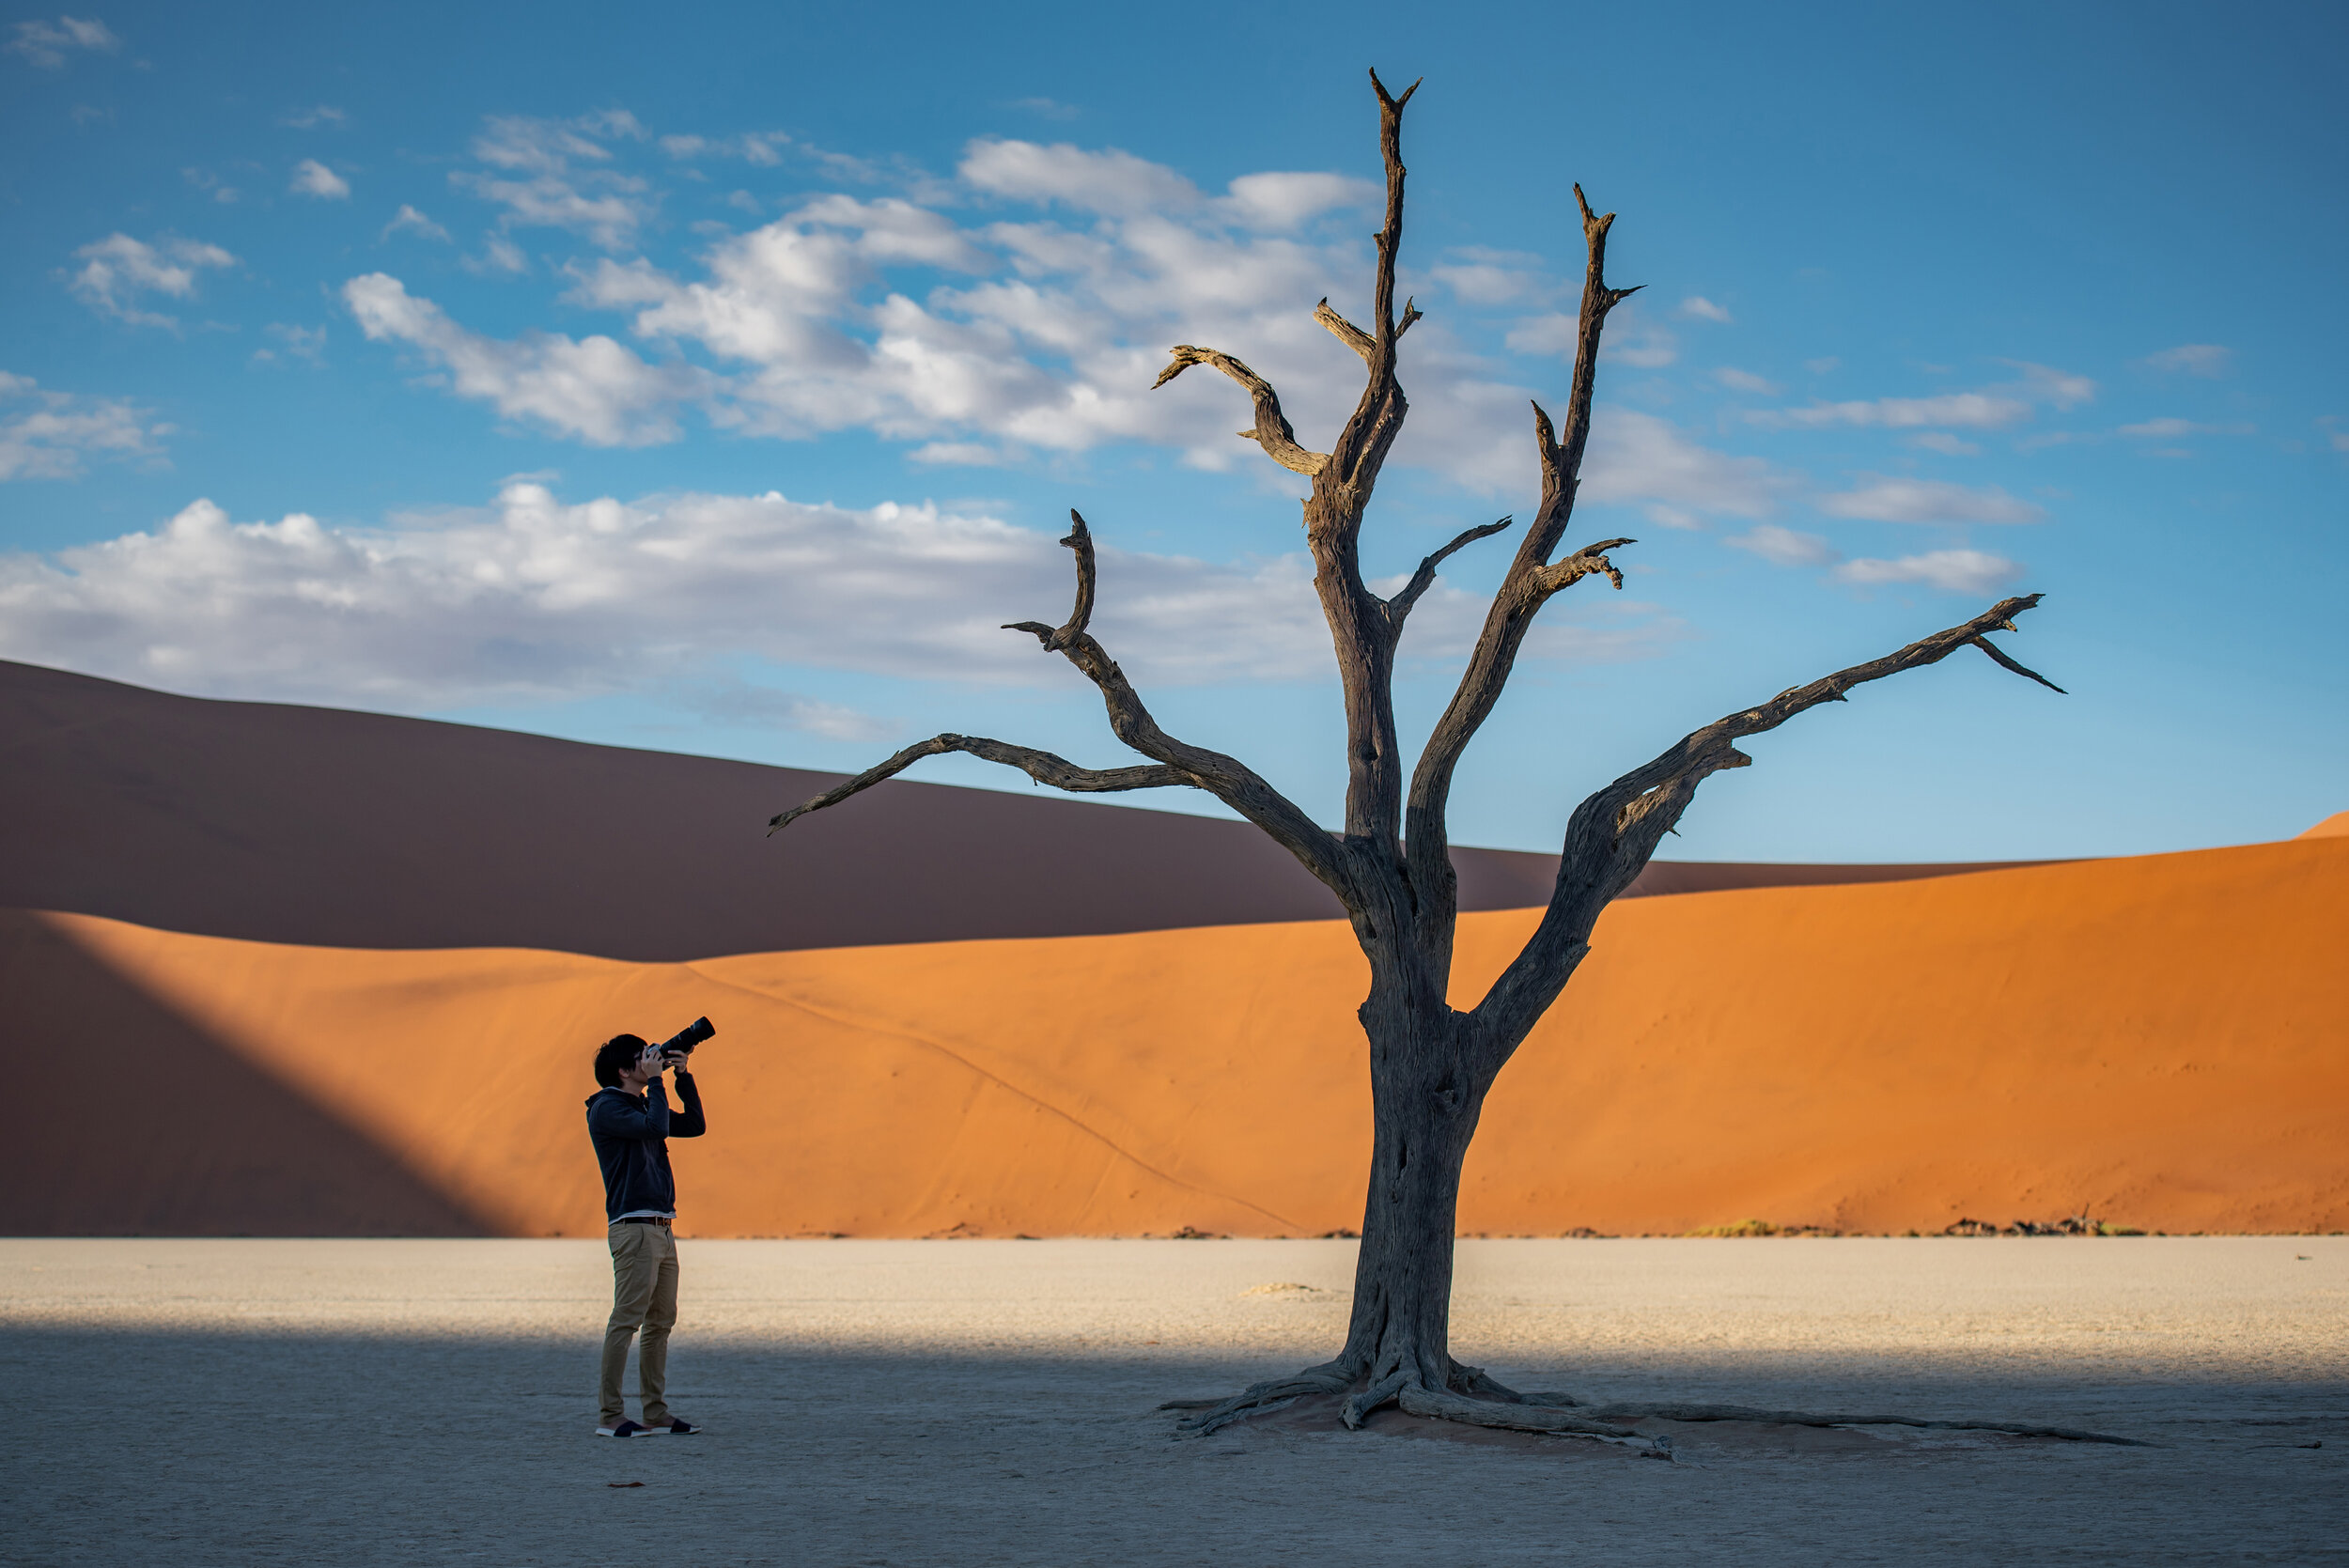 A photographer snaps a picture of a tree in Deadvlei